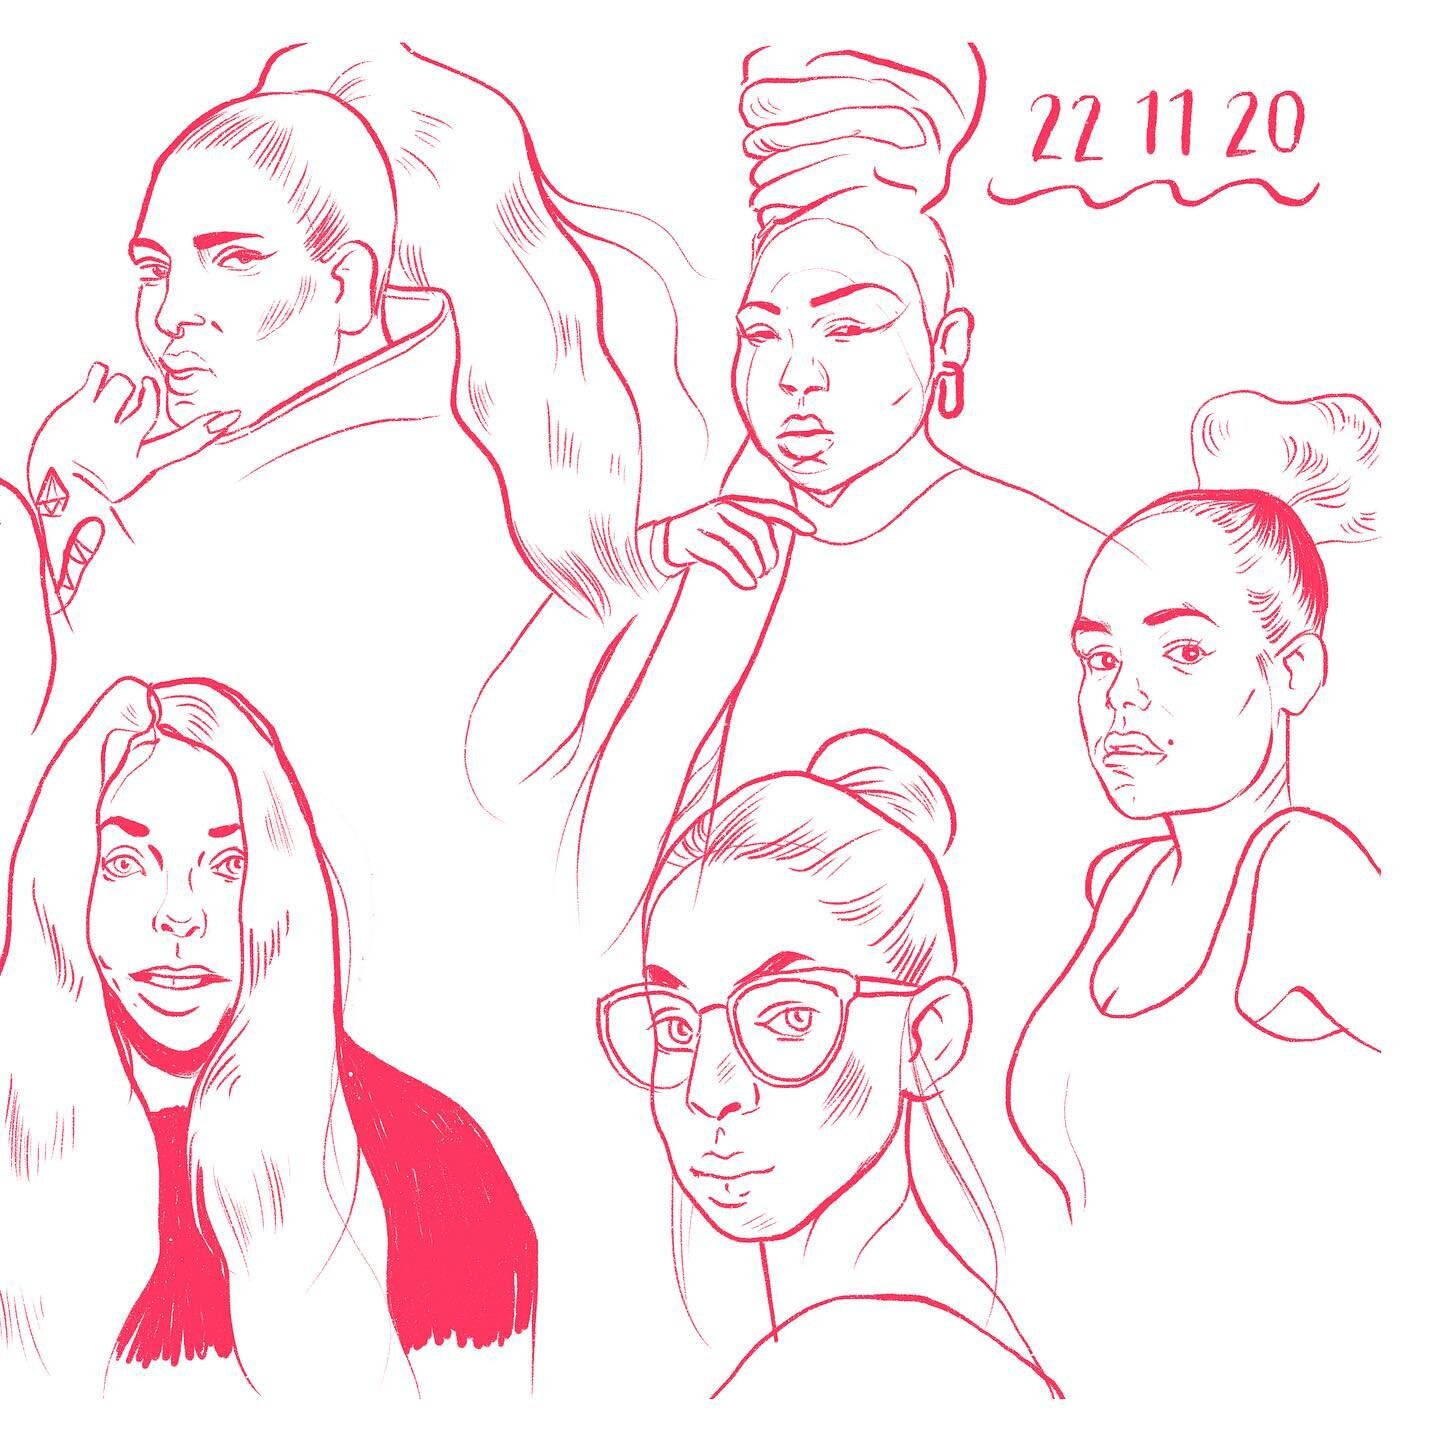 Hi! I found this in my random drawings file. I don't remember making this or who the people are, although I think one is from an ad for glasses. Bye!
 
 
 
#menah #illustration #portrait #digitalart